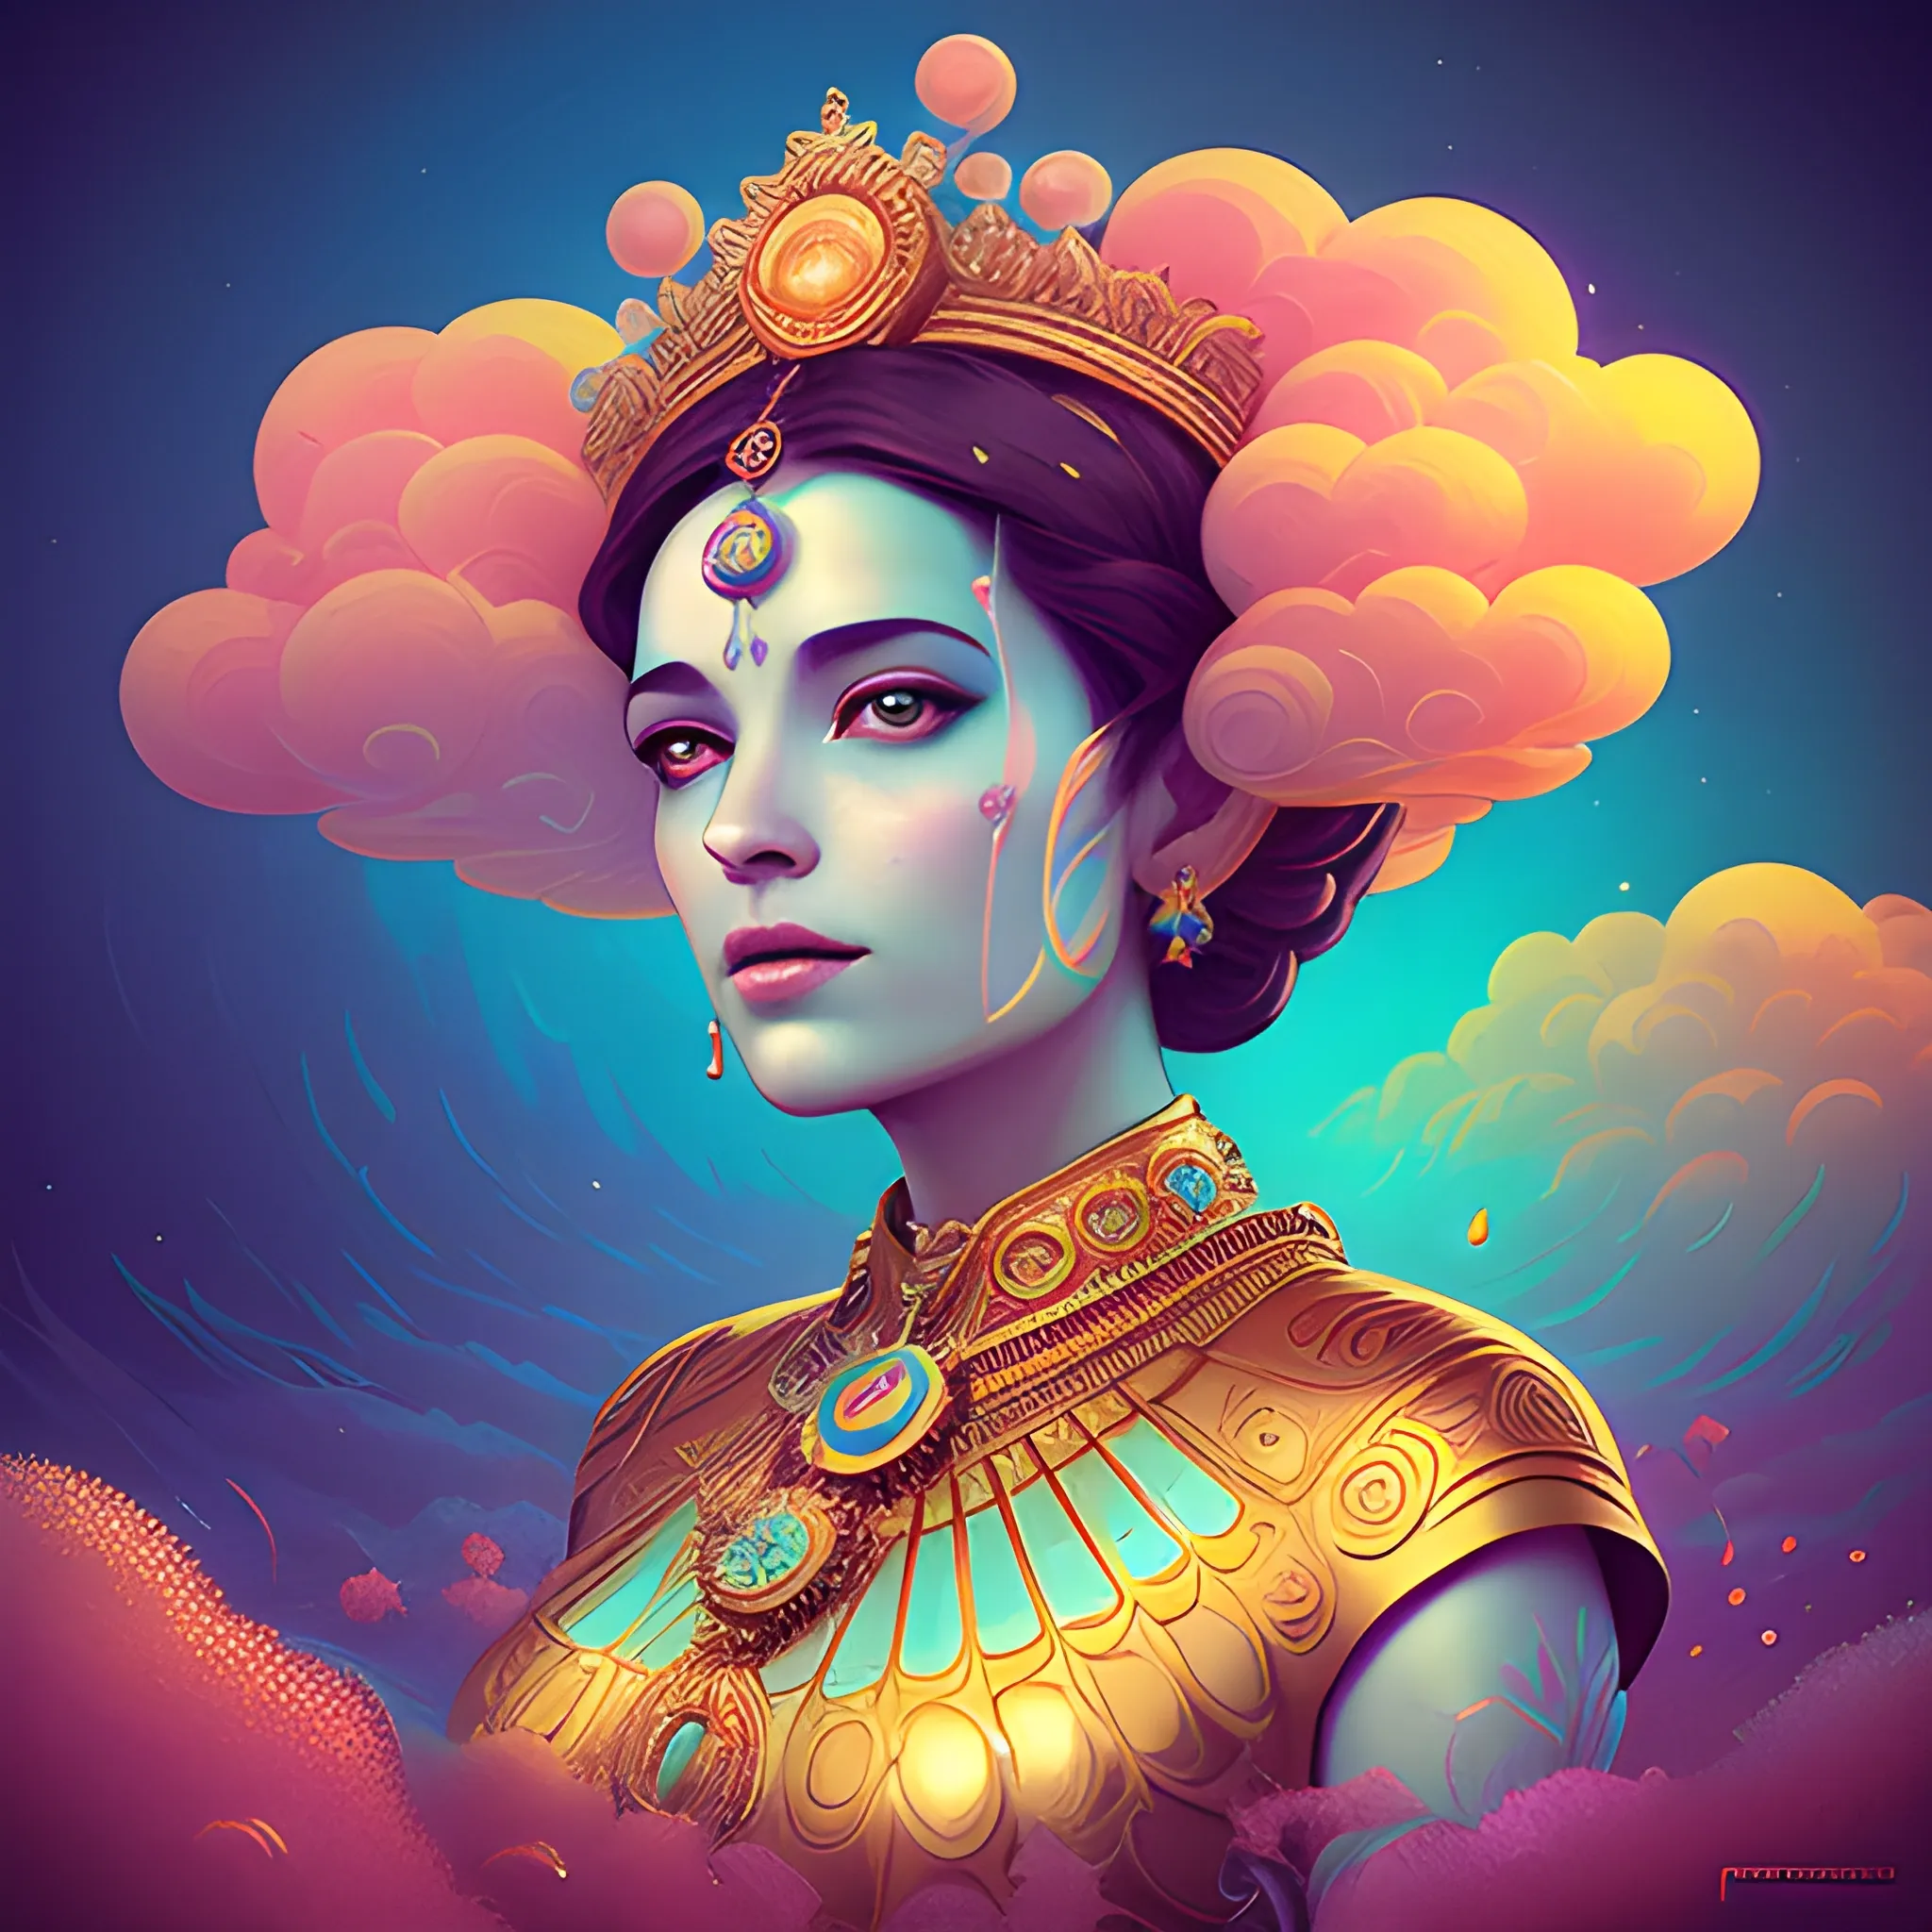 Flowery beautiful face divine feminine empress or priestess with gold jewellery, by petros afshar, ross tran, Tom Bagshaw, tom whalen, underwater bubbly psychedelic clouds, Anaglyph 3D lens blur effect